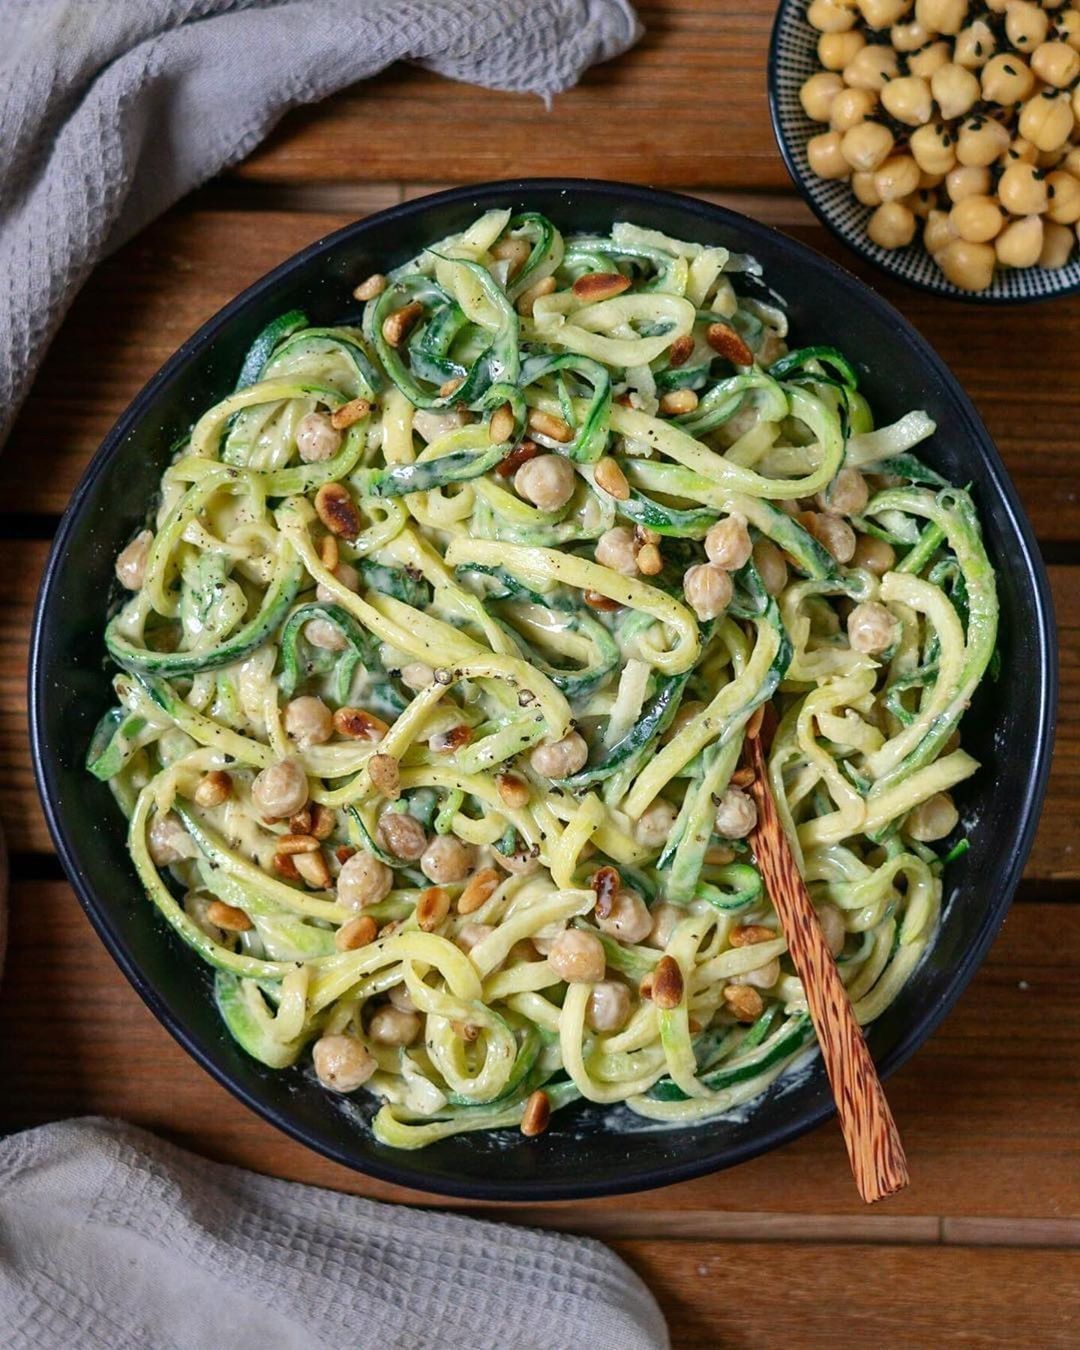 creamy tahini-garlic sauce with zucchini noodles, chickpeas and pine nuts